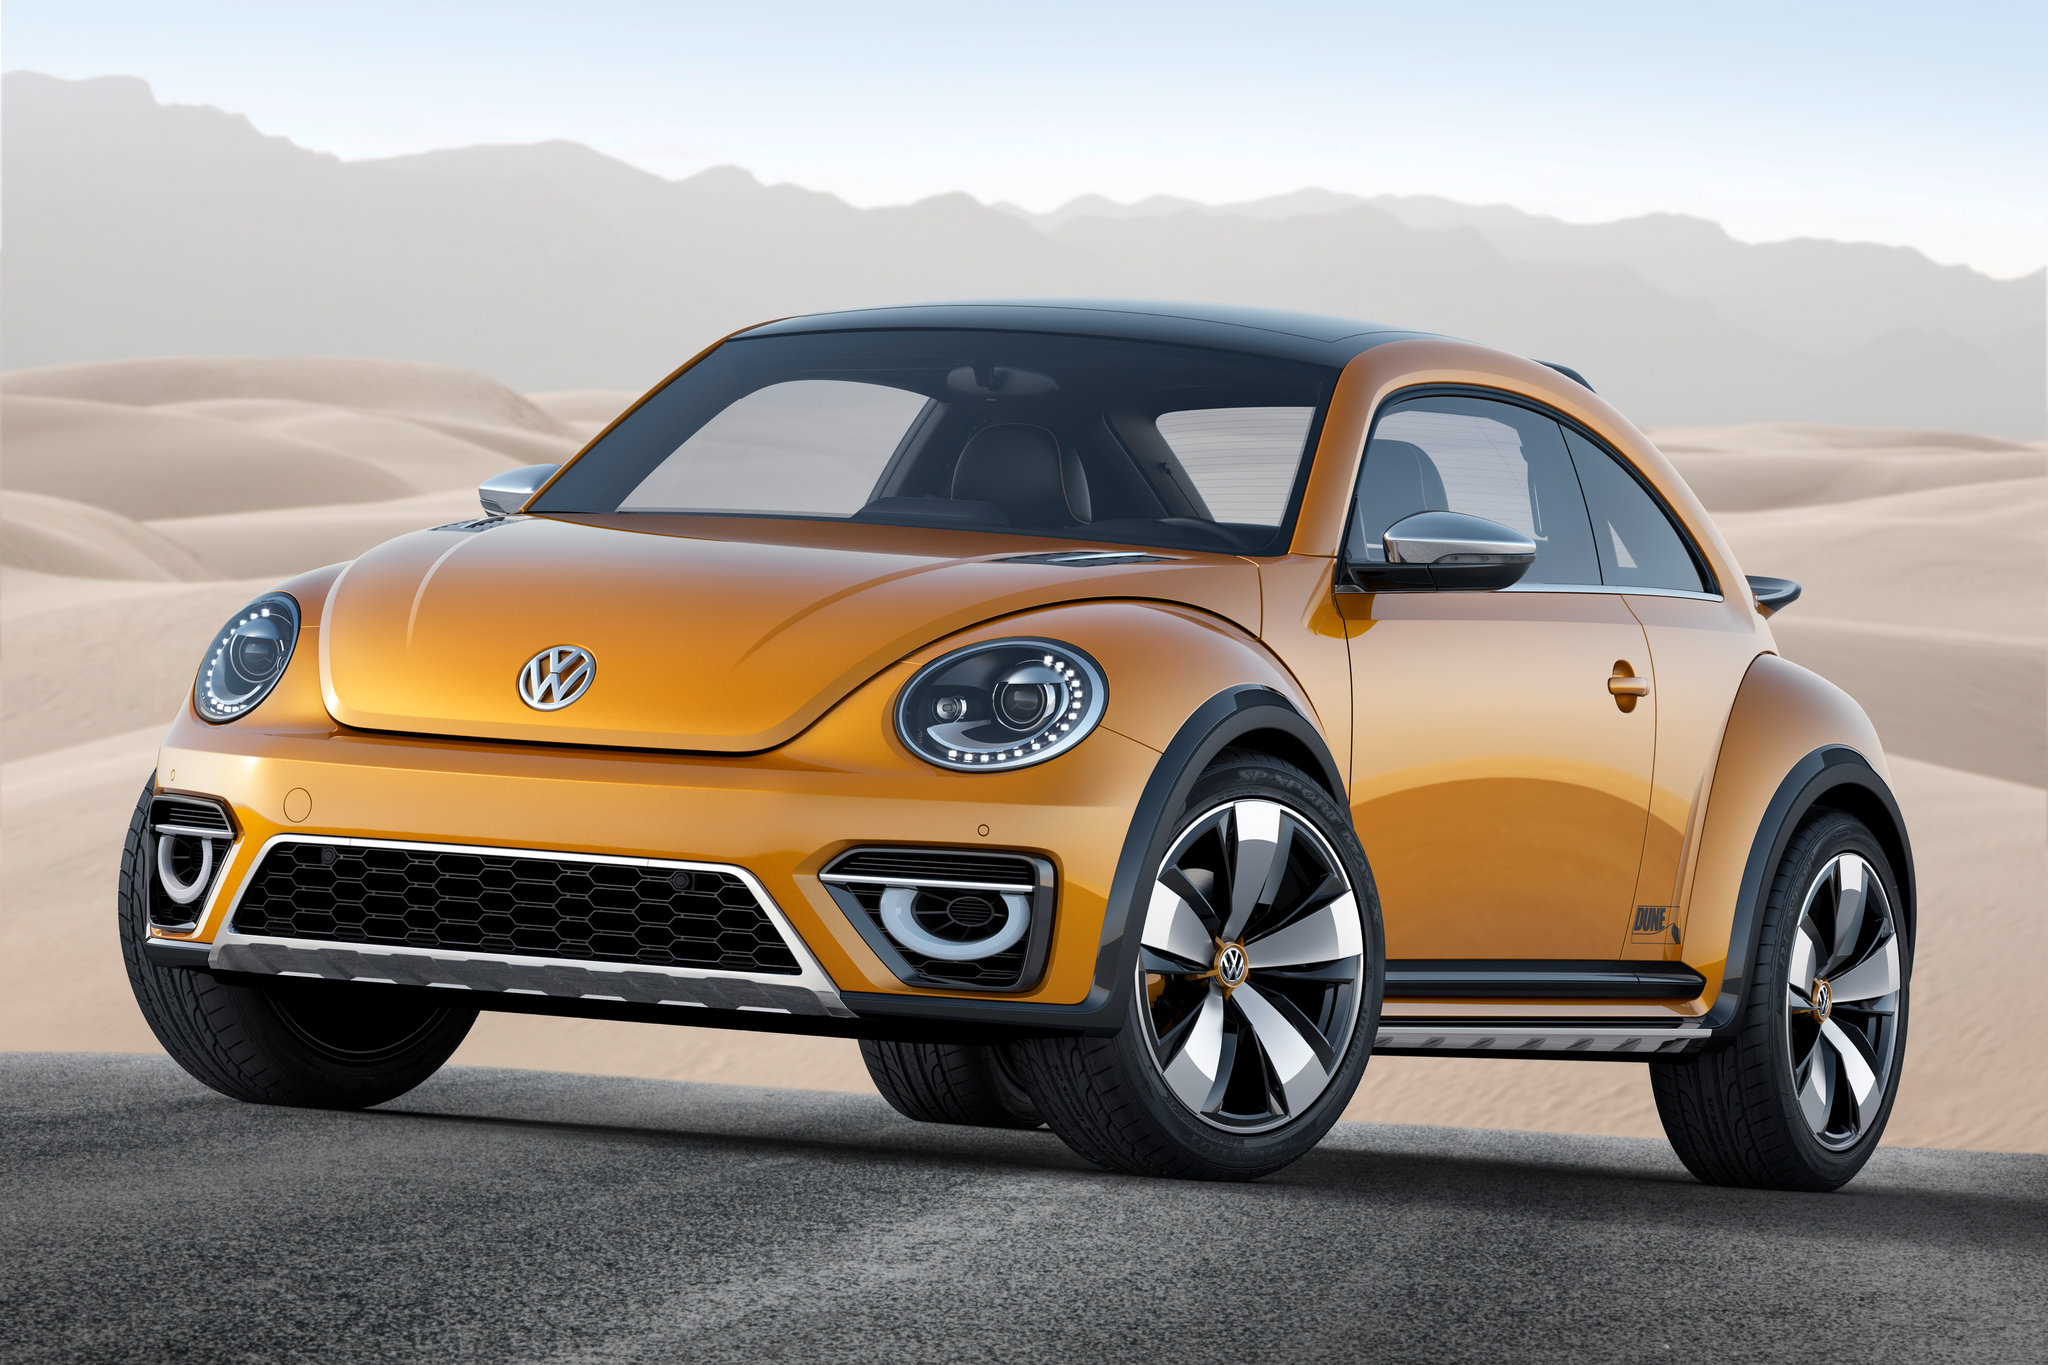 VW Aims Off-Road With Beetle Concept - The New York Times